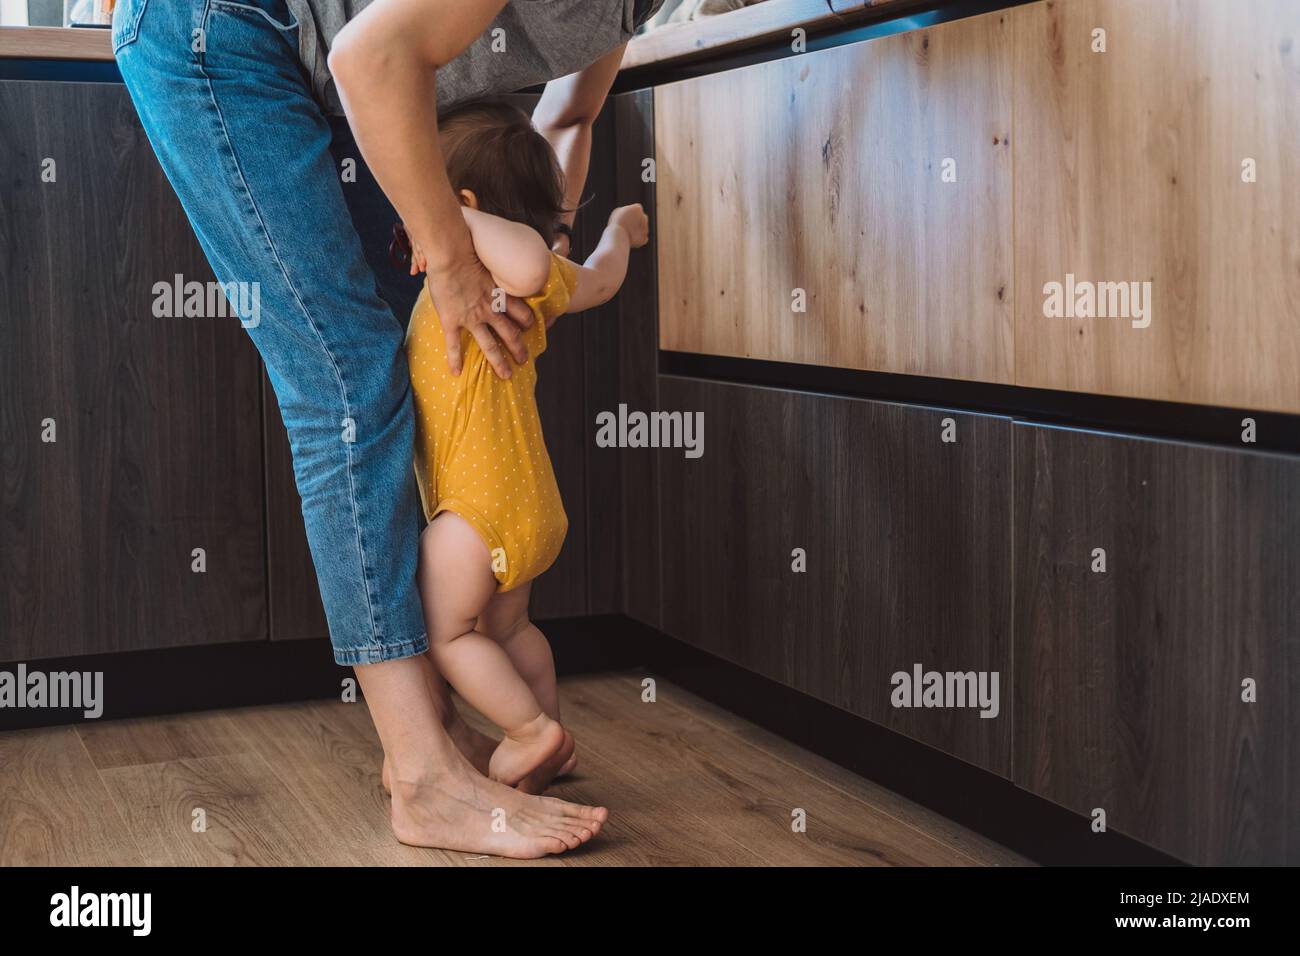 Mother picking up the angry baby standing at her feet. Mother and her baby. Stock Photo